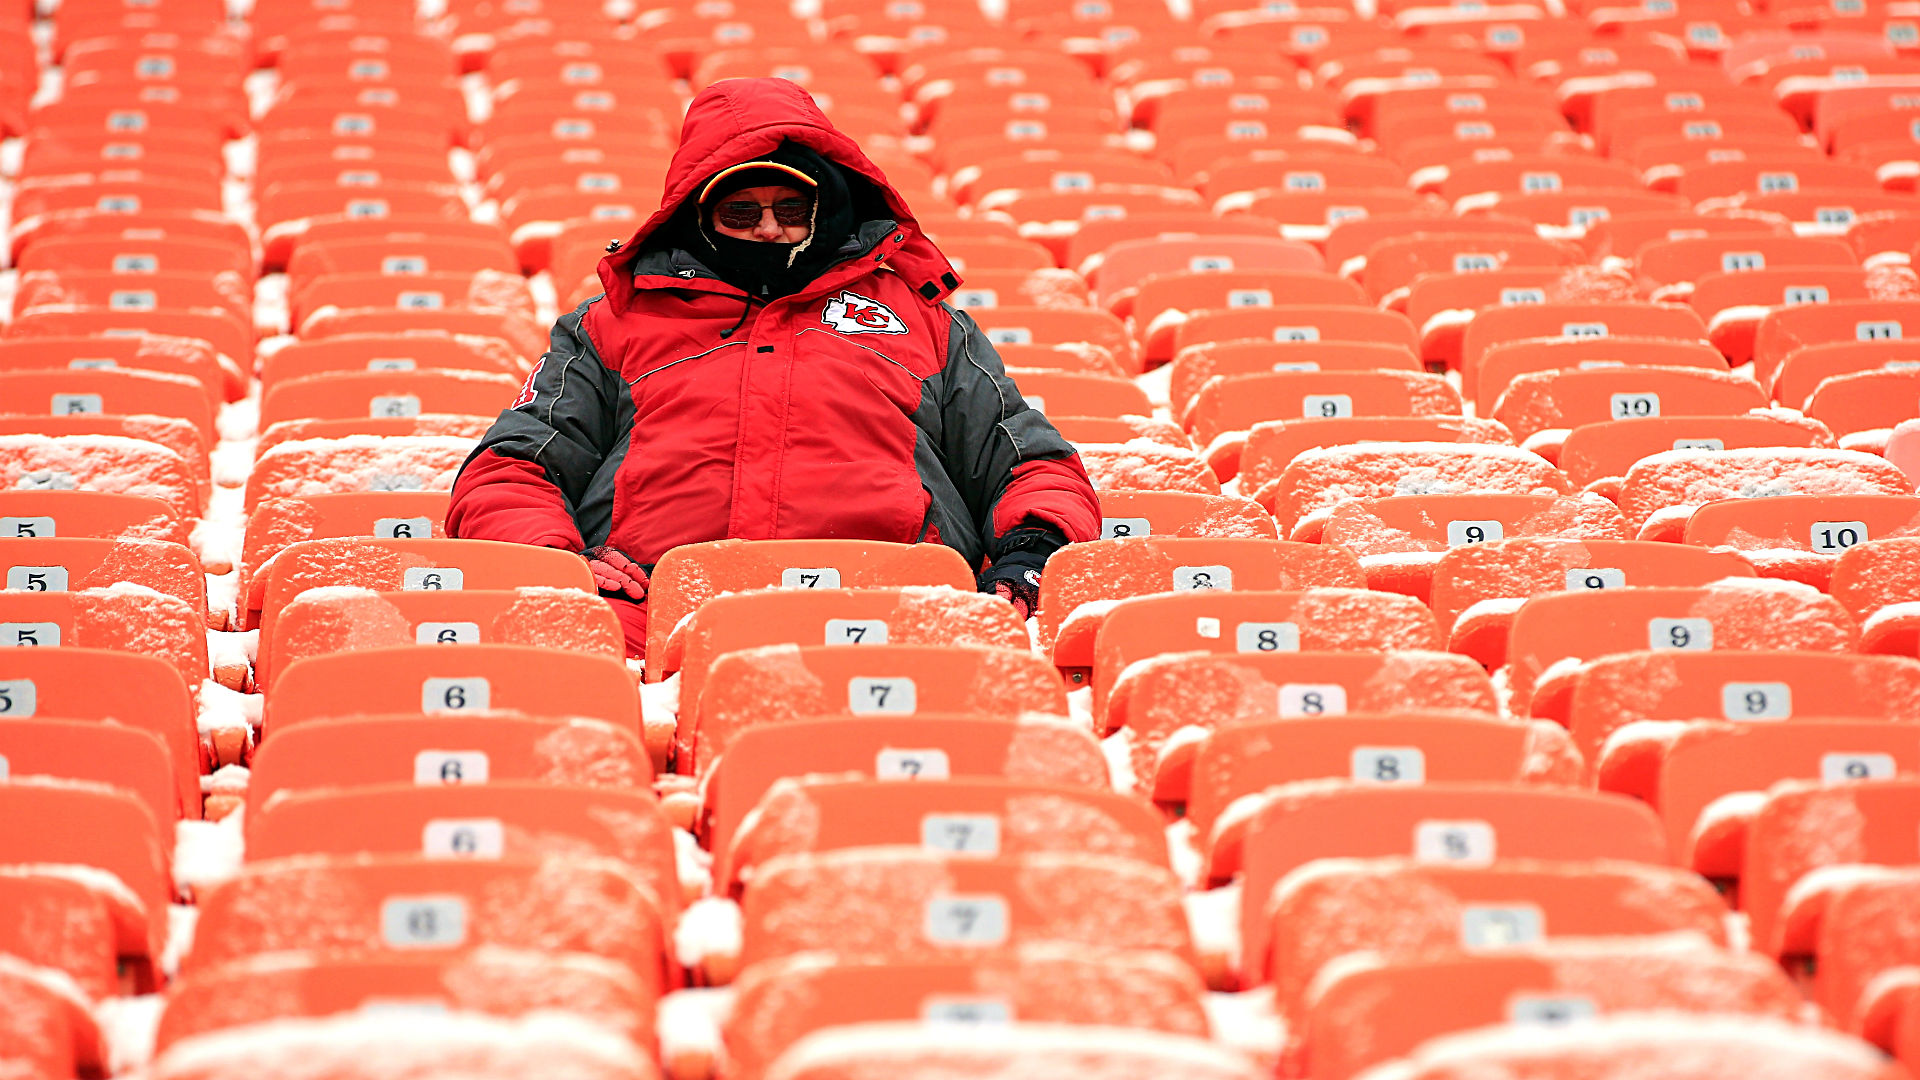 NFL playoffs 2019: Weather in Kansas City could affect Chiefs-Colts game | NFL ...